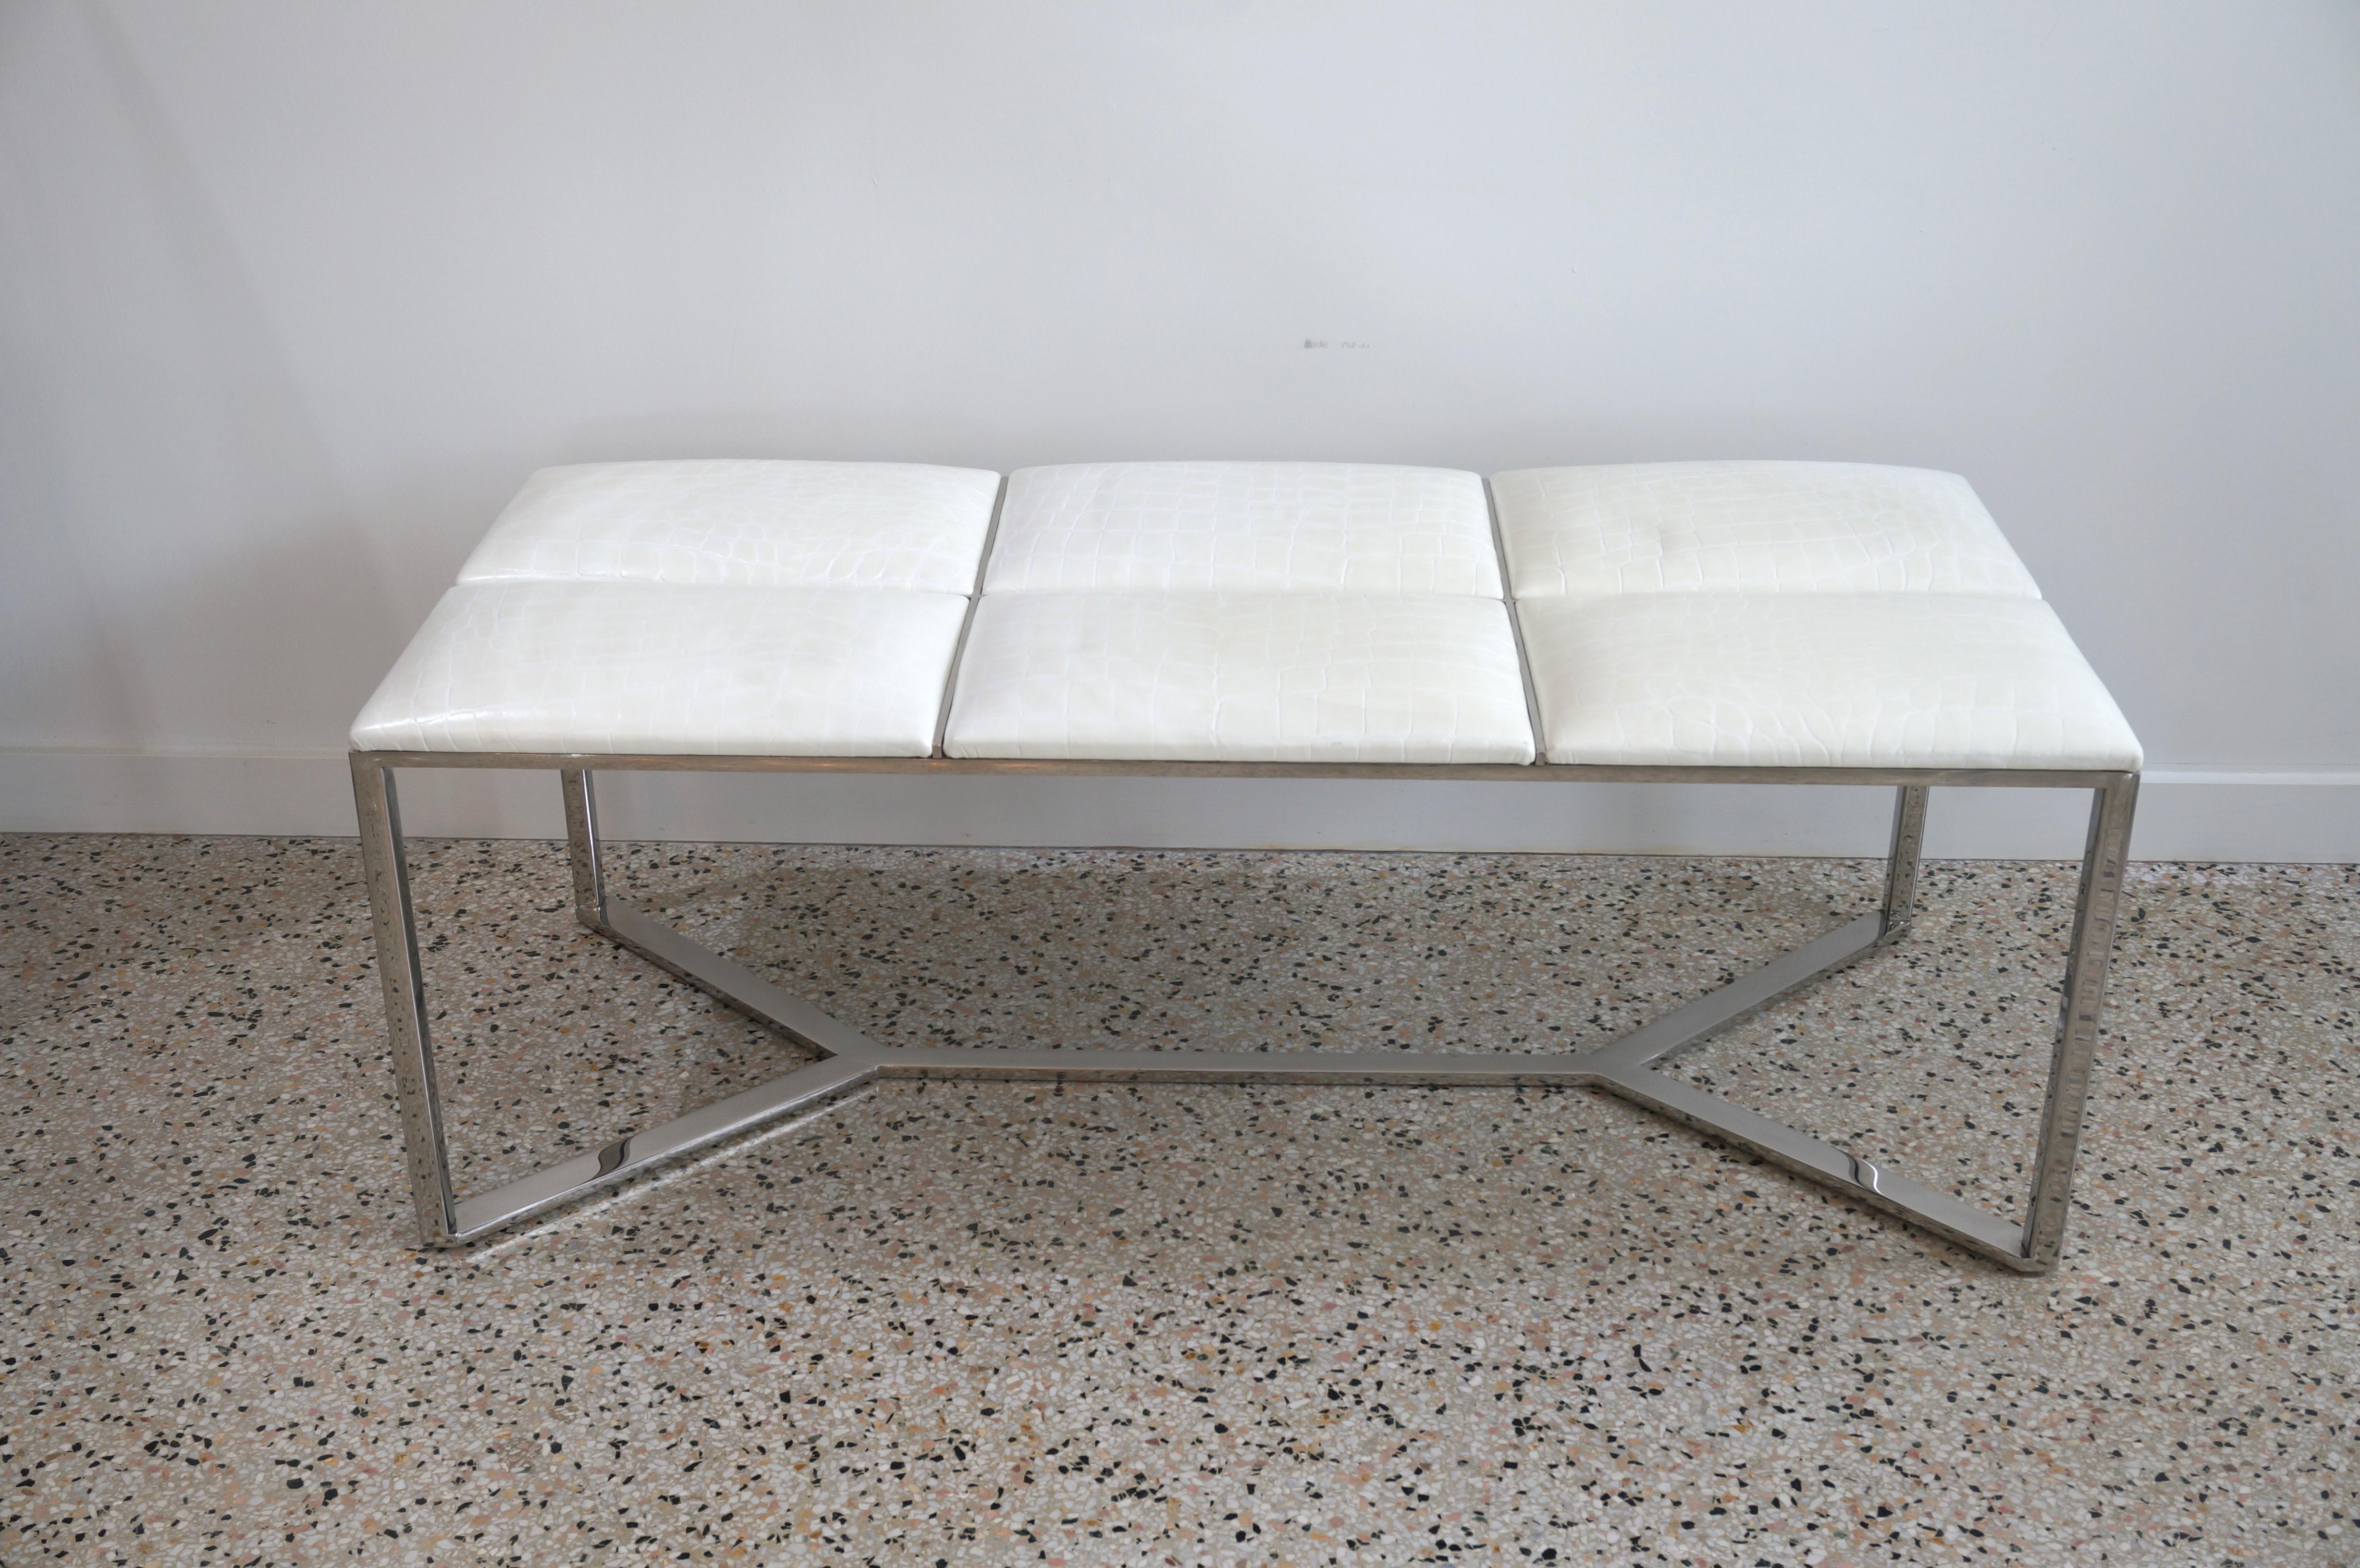 This stylish and chic polished steel and leather bench could be used as a cocktail table or at the end of your bed. The leather is an off-white and egg shell colored faux alligator. 

This piece is very much in the style of pieces created by Milo